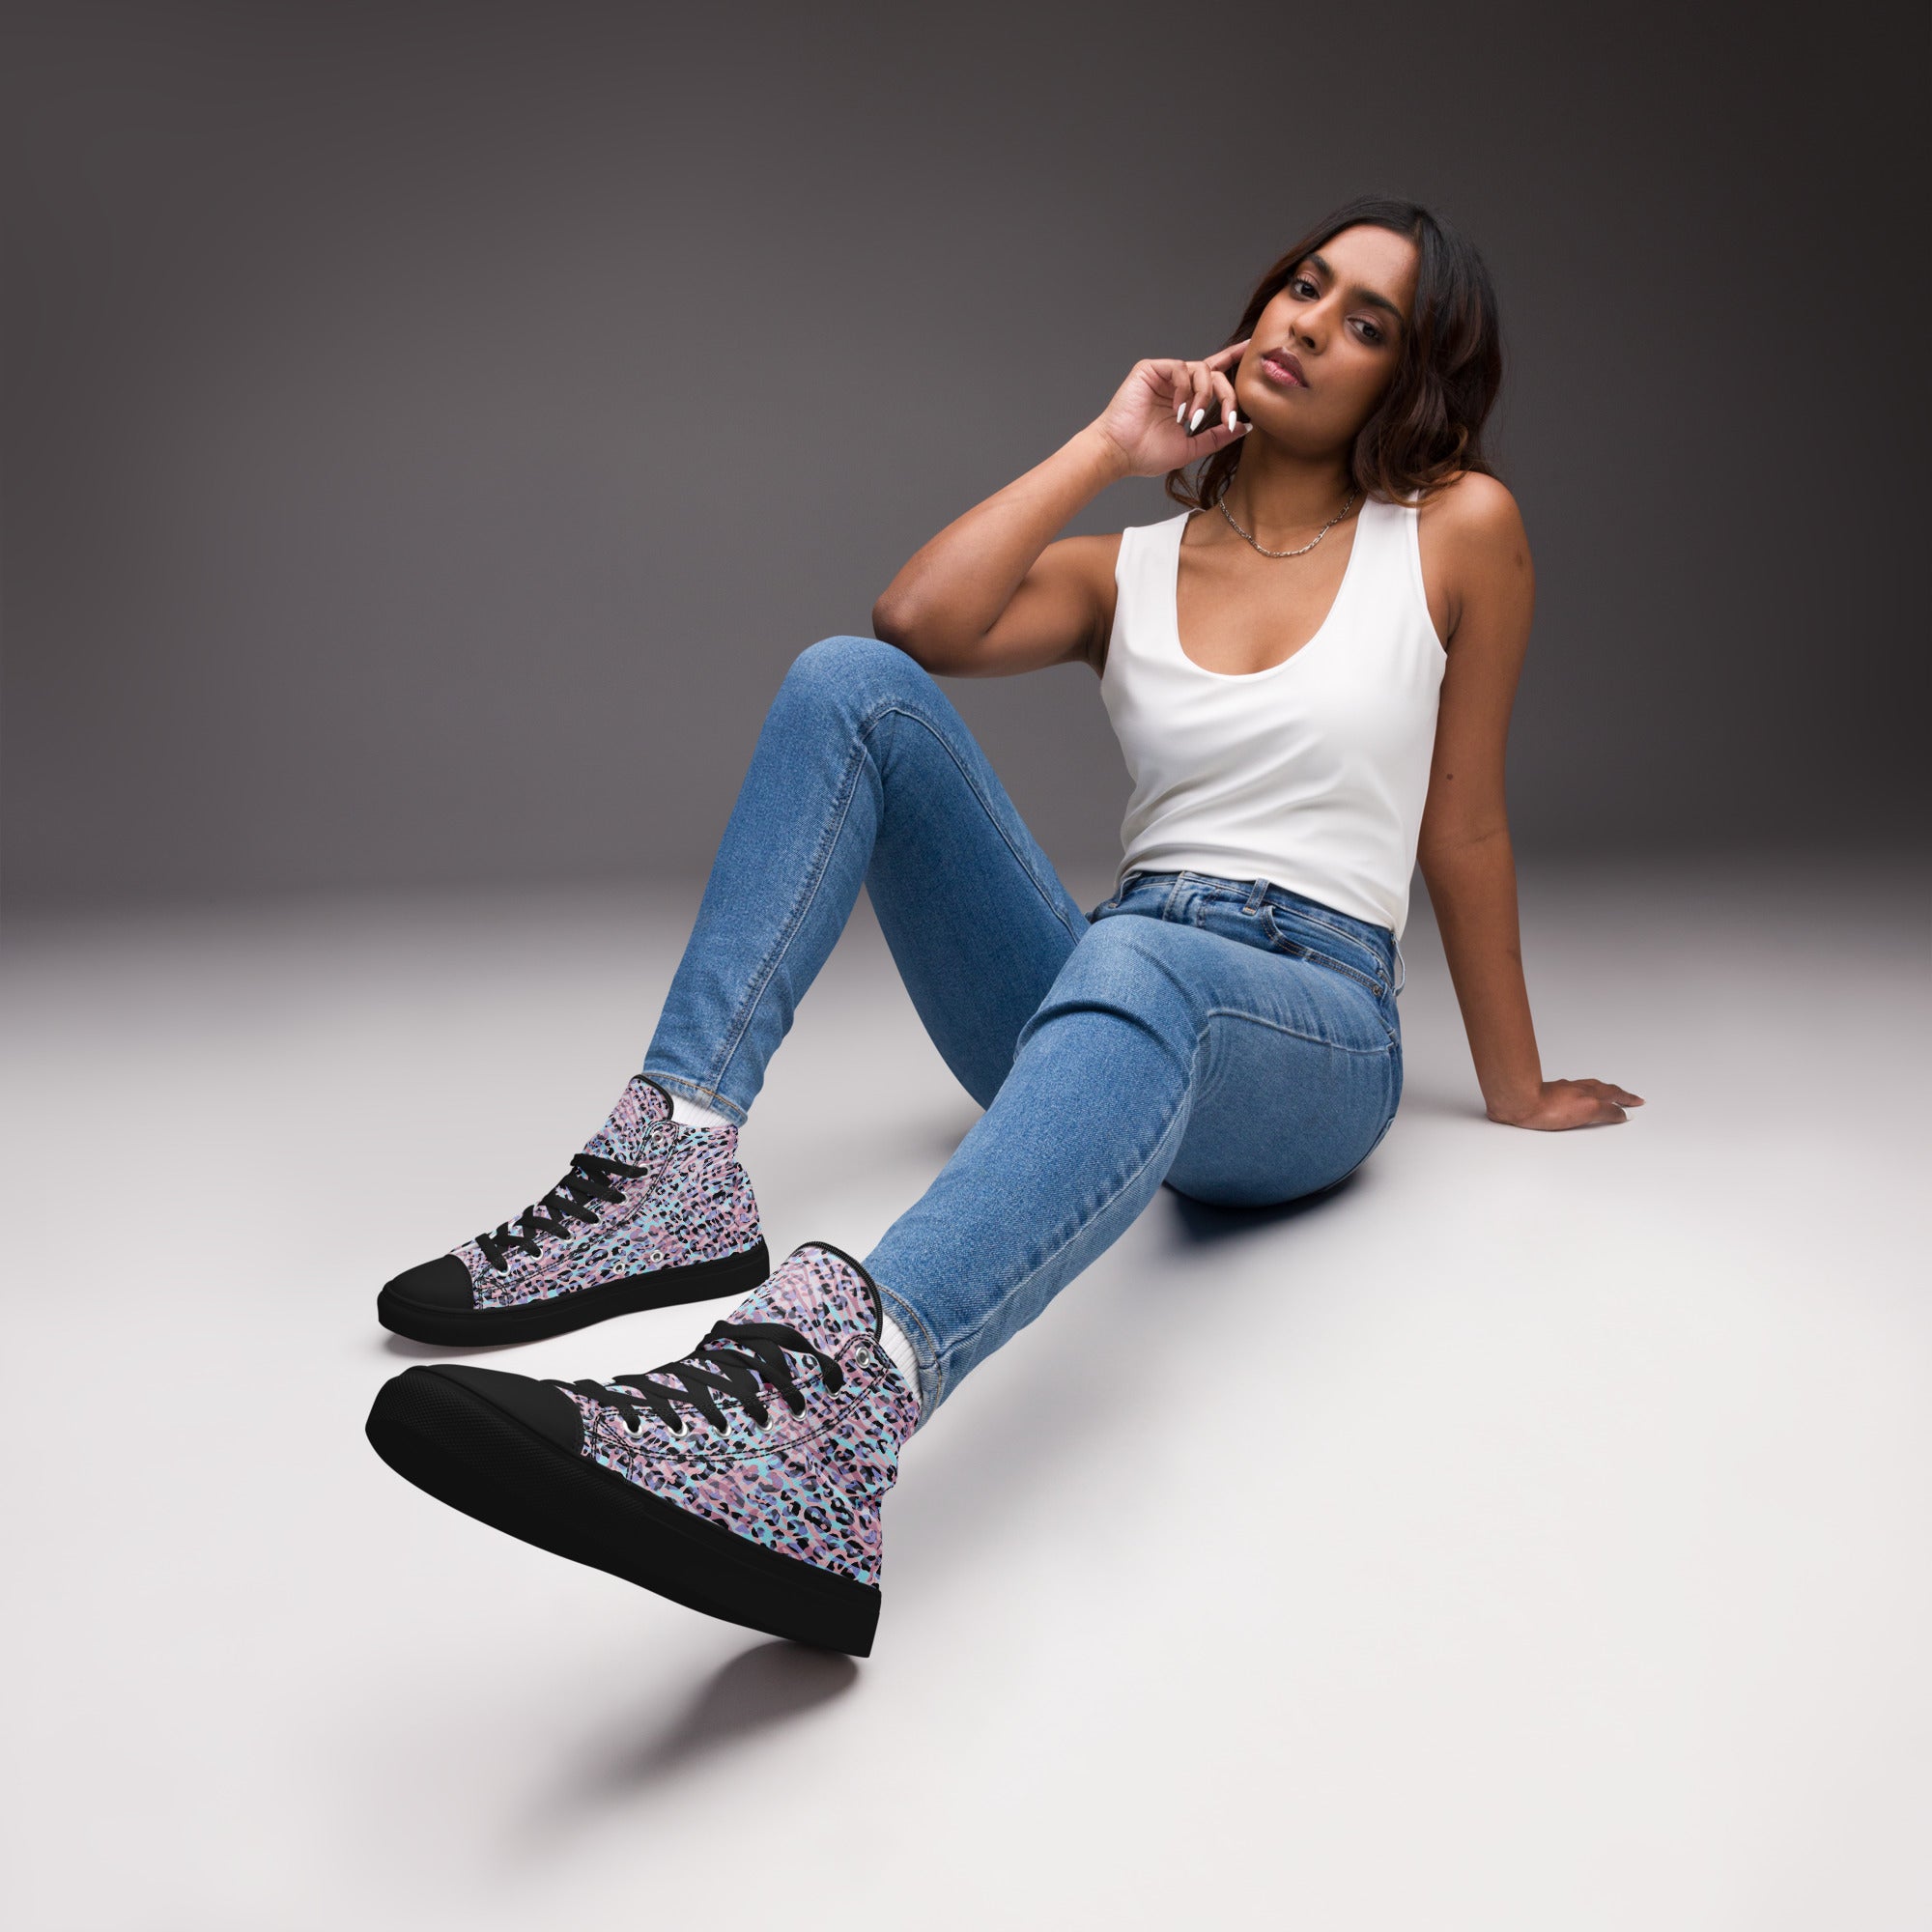 Women’s high top canvas shoes- Zebra and Leopard Print Pink with Cyan